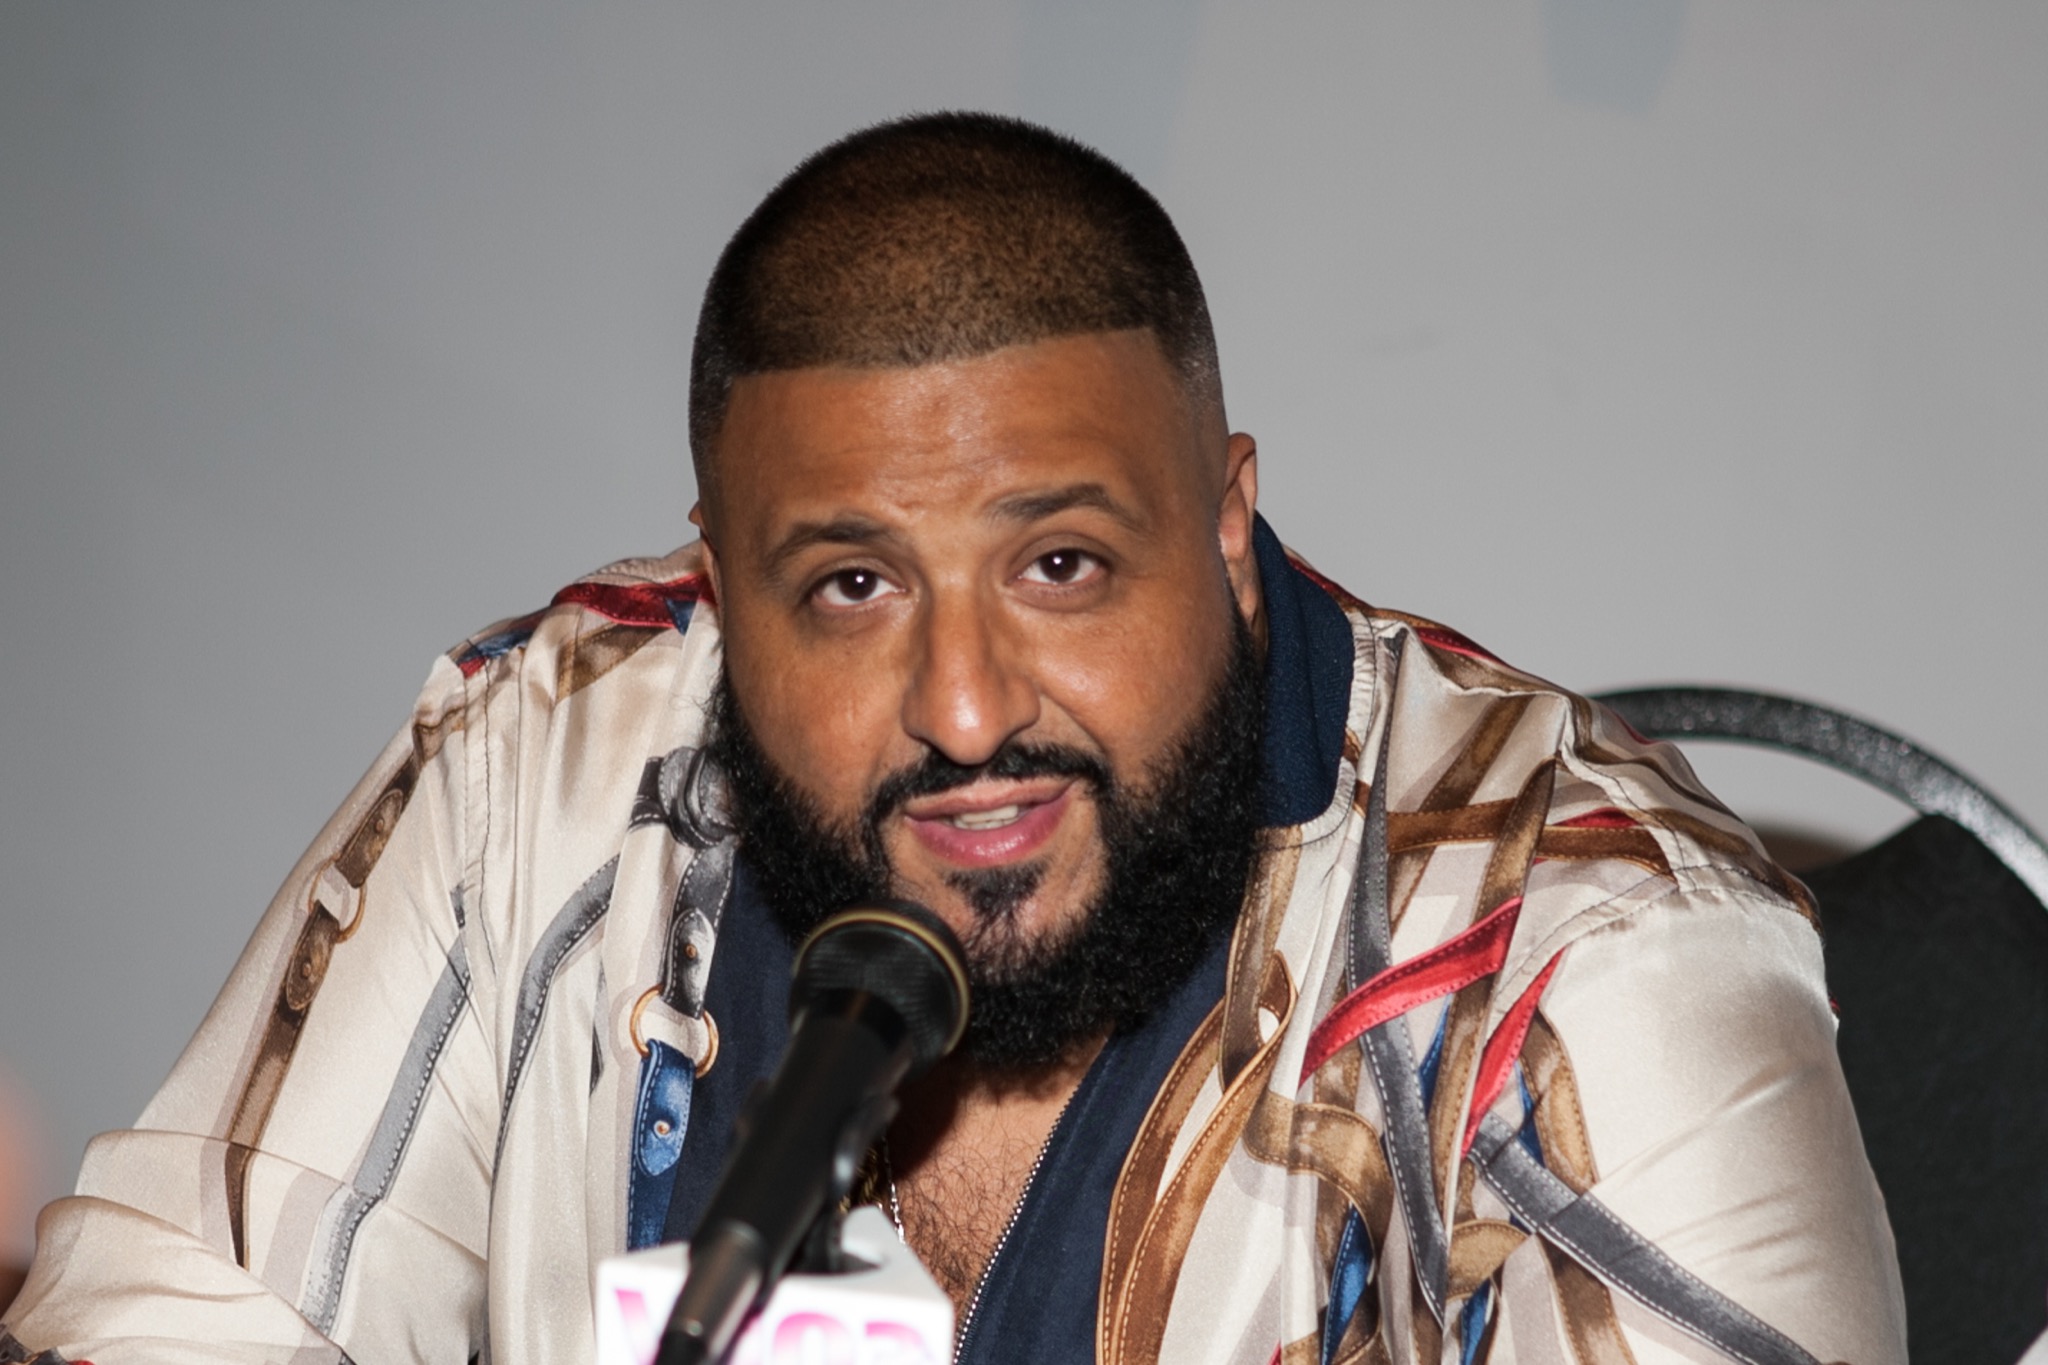 How much is DJ Khaled worth now?